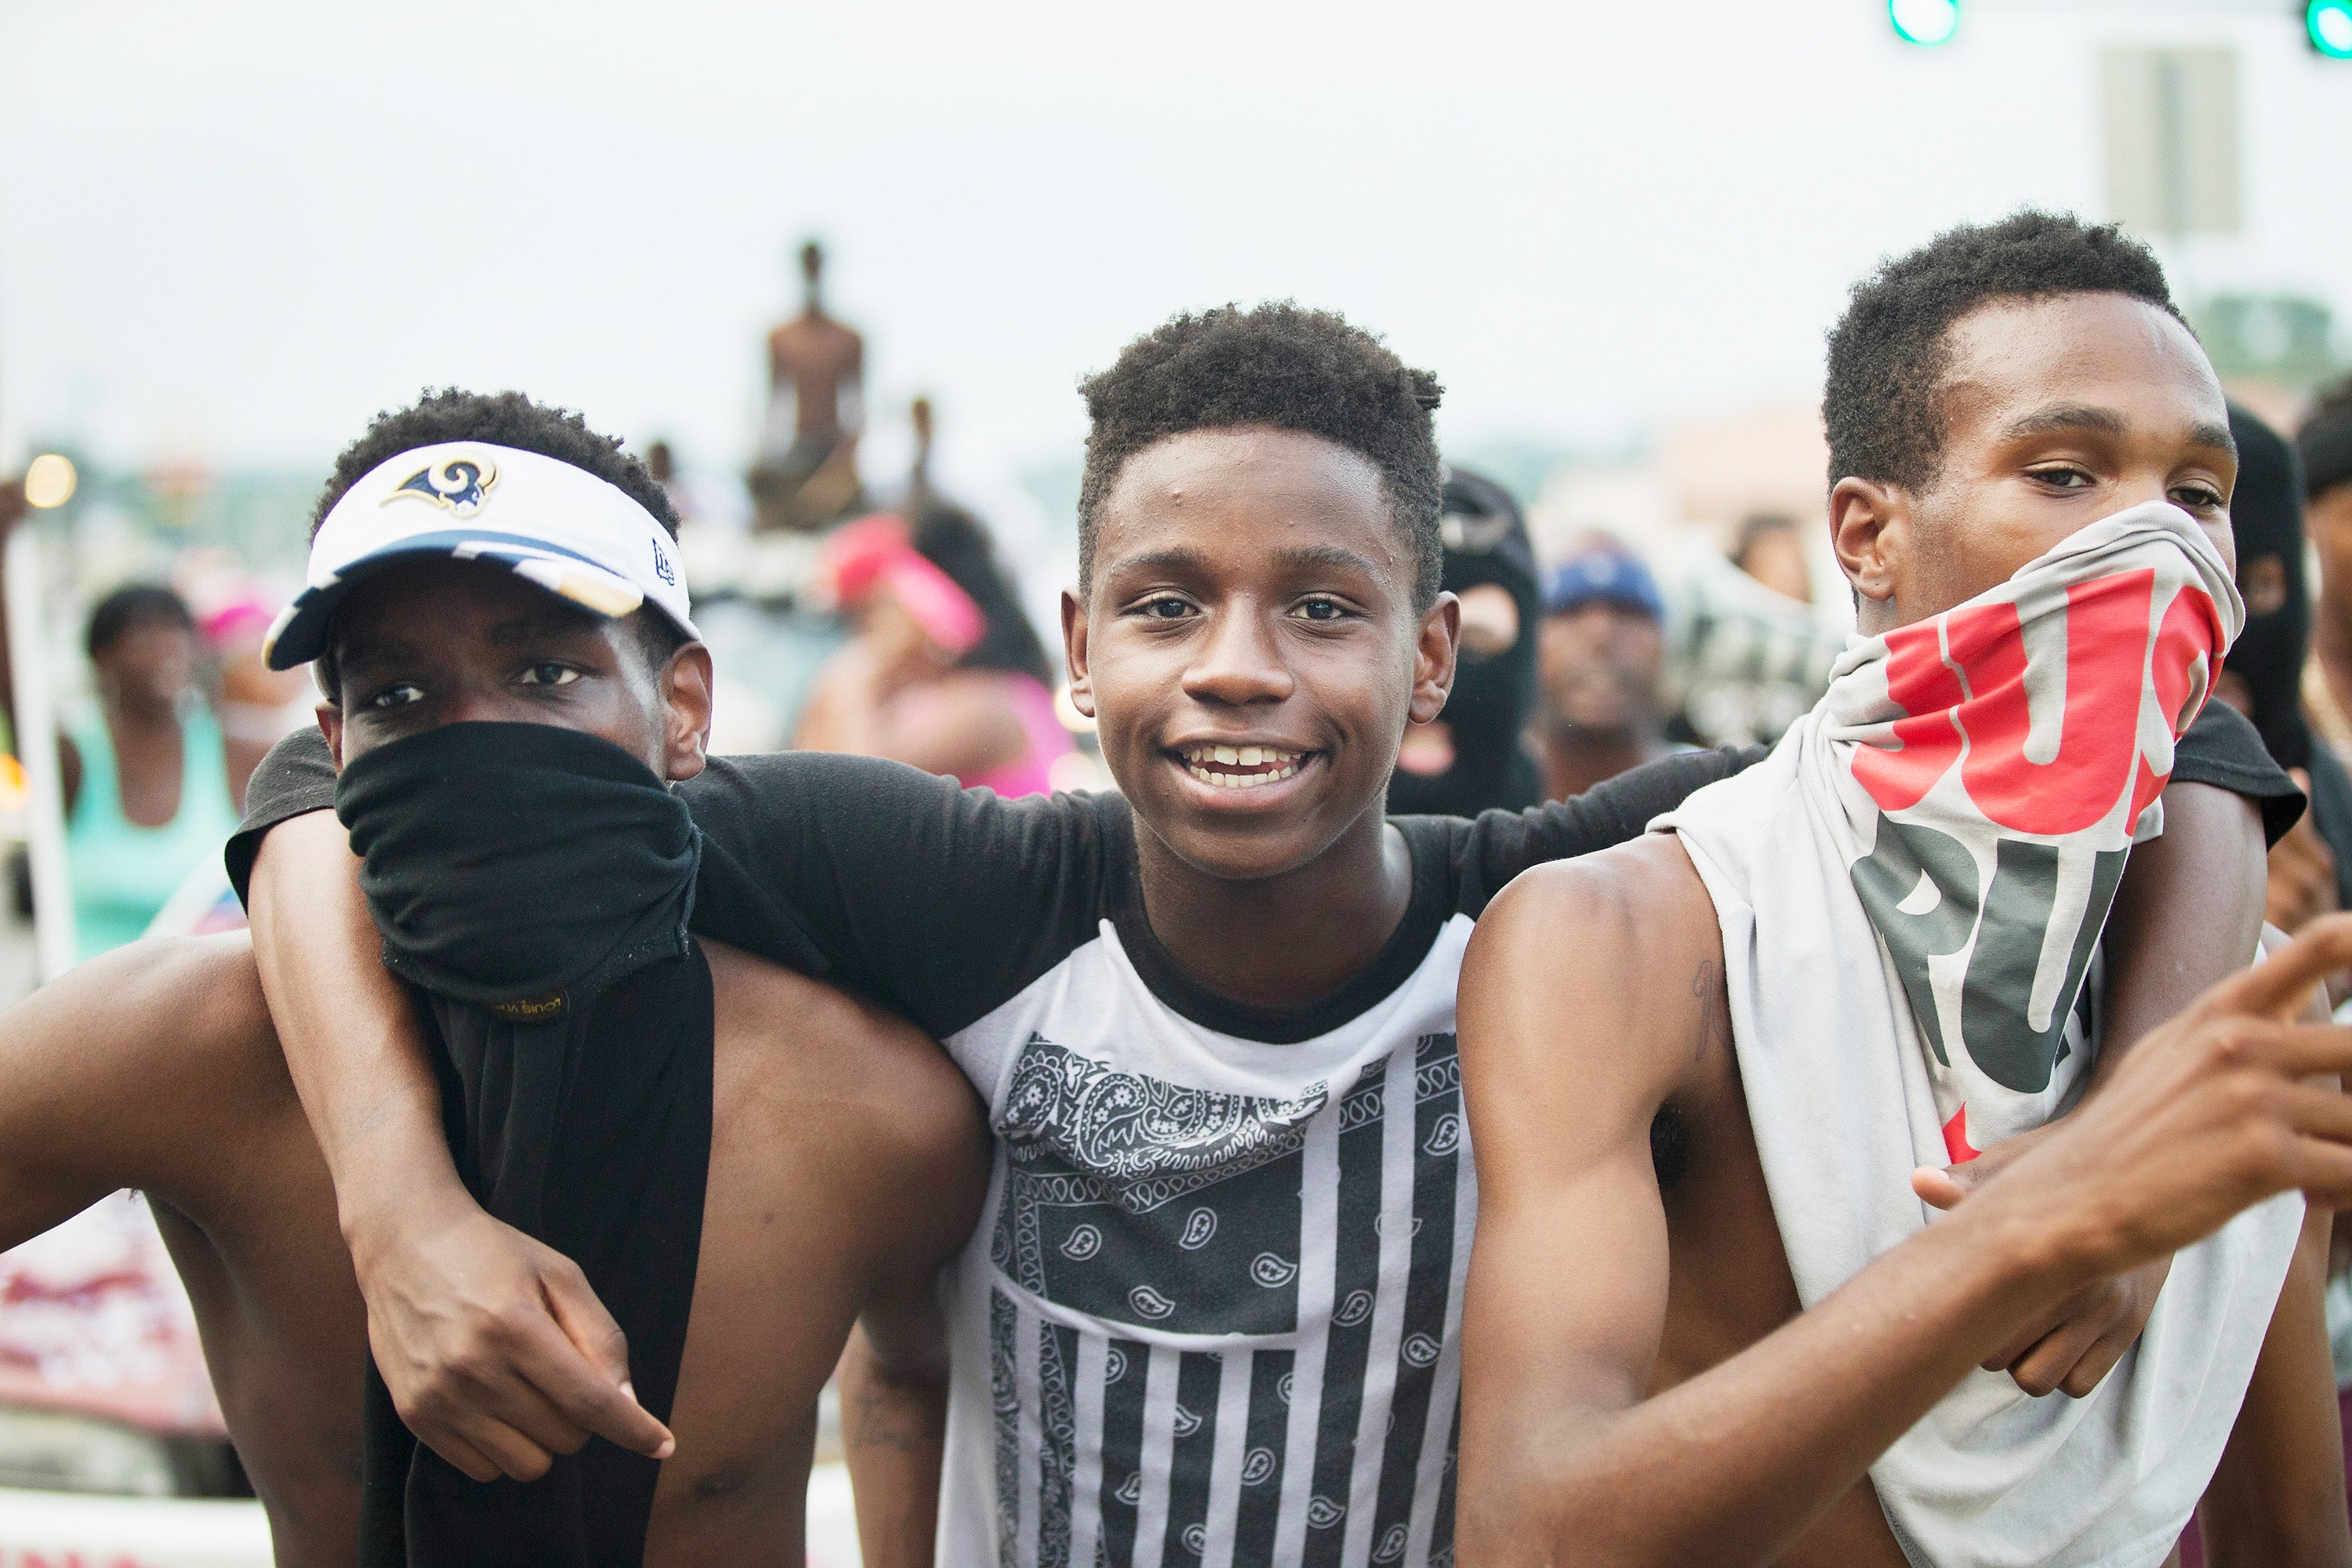 PHOTOS: 30 of the Most Captivating Images from This Week's Turbulence in Ferguson